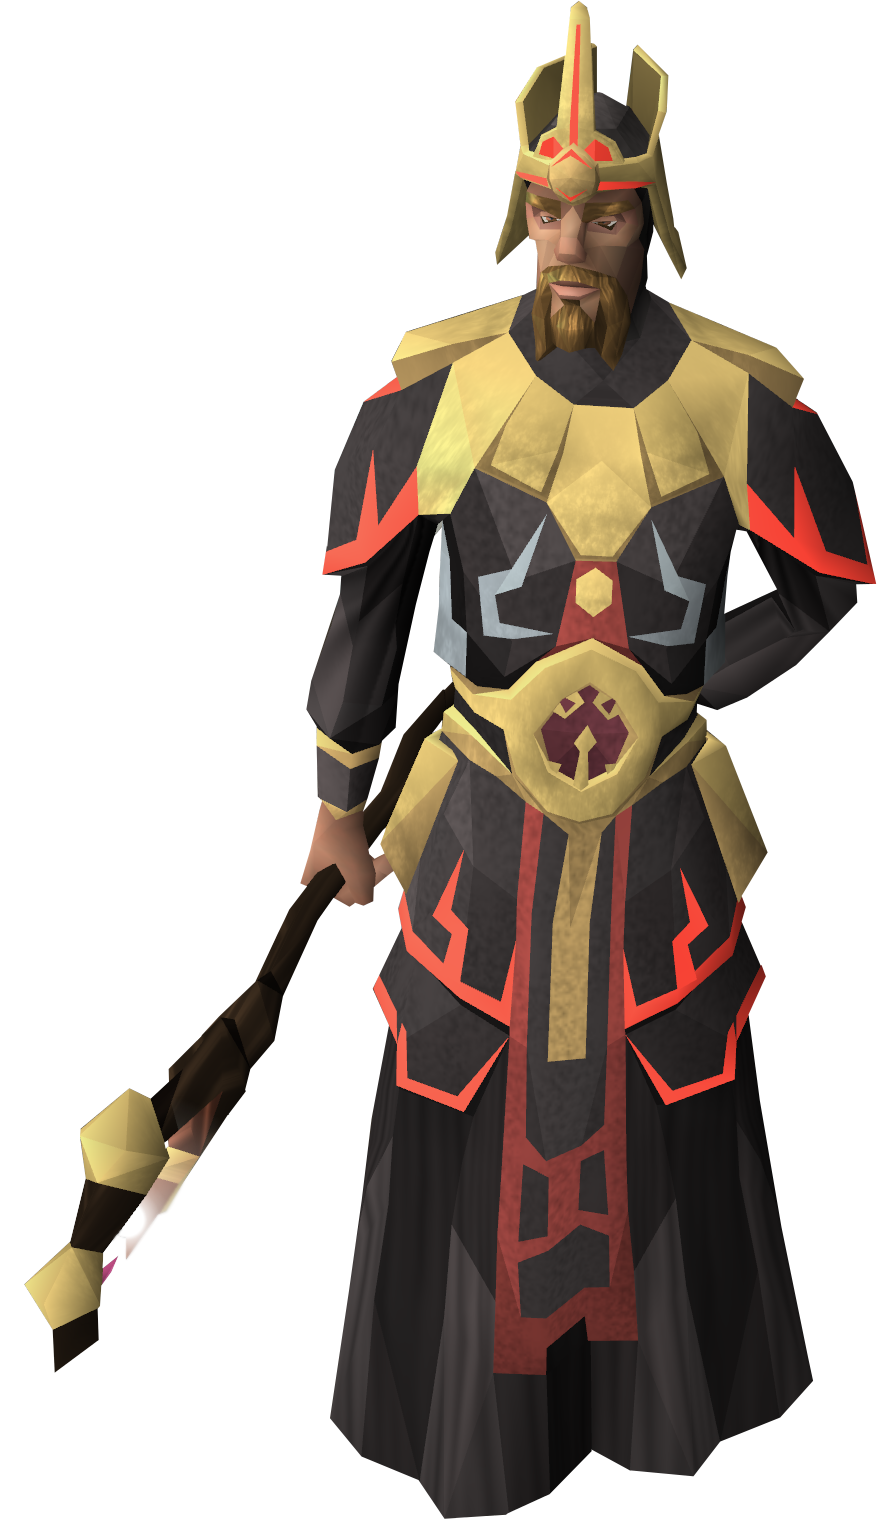 New Foundations - The RuneScape Wiki